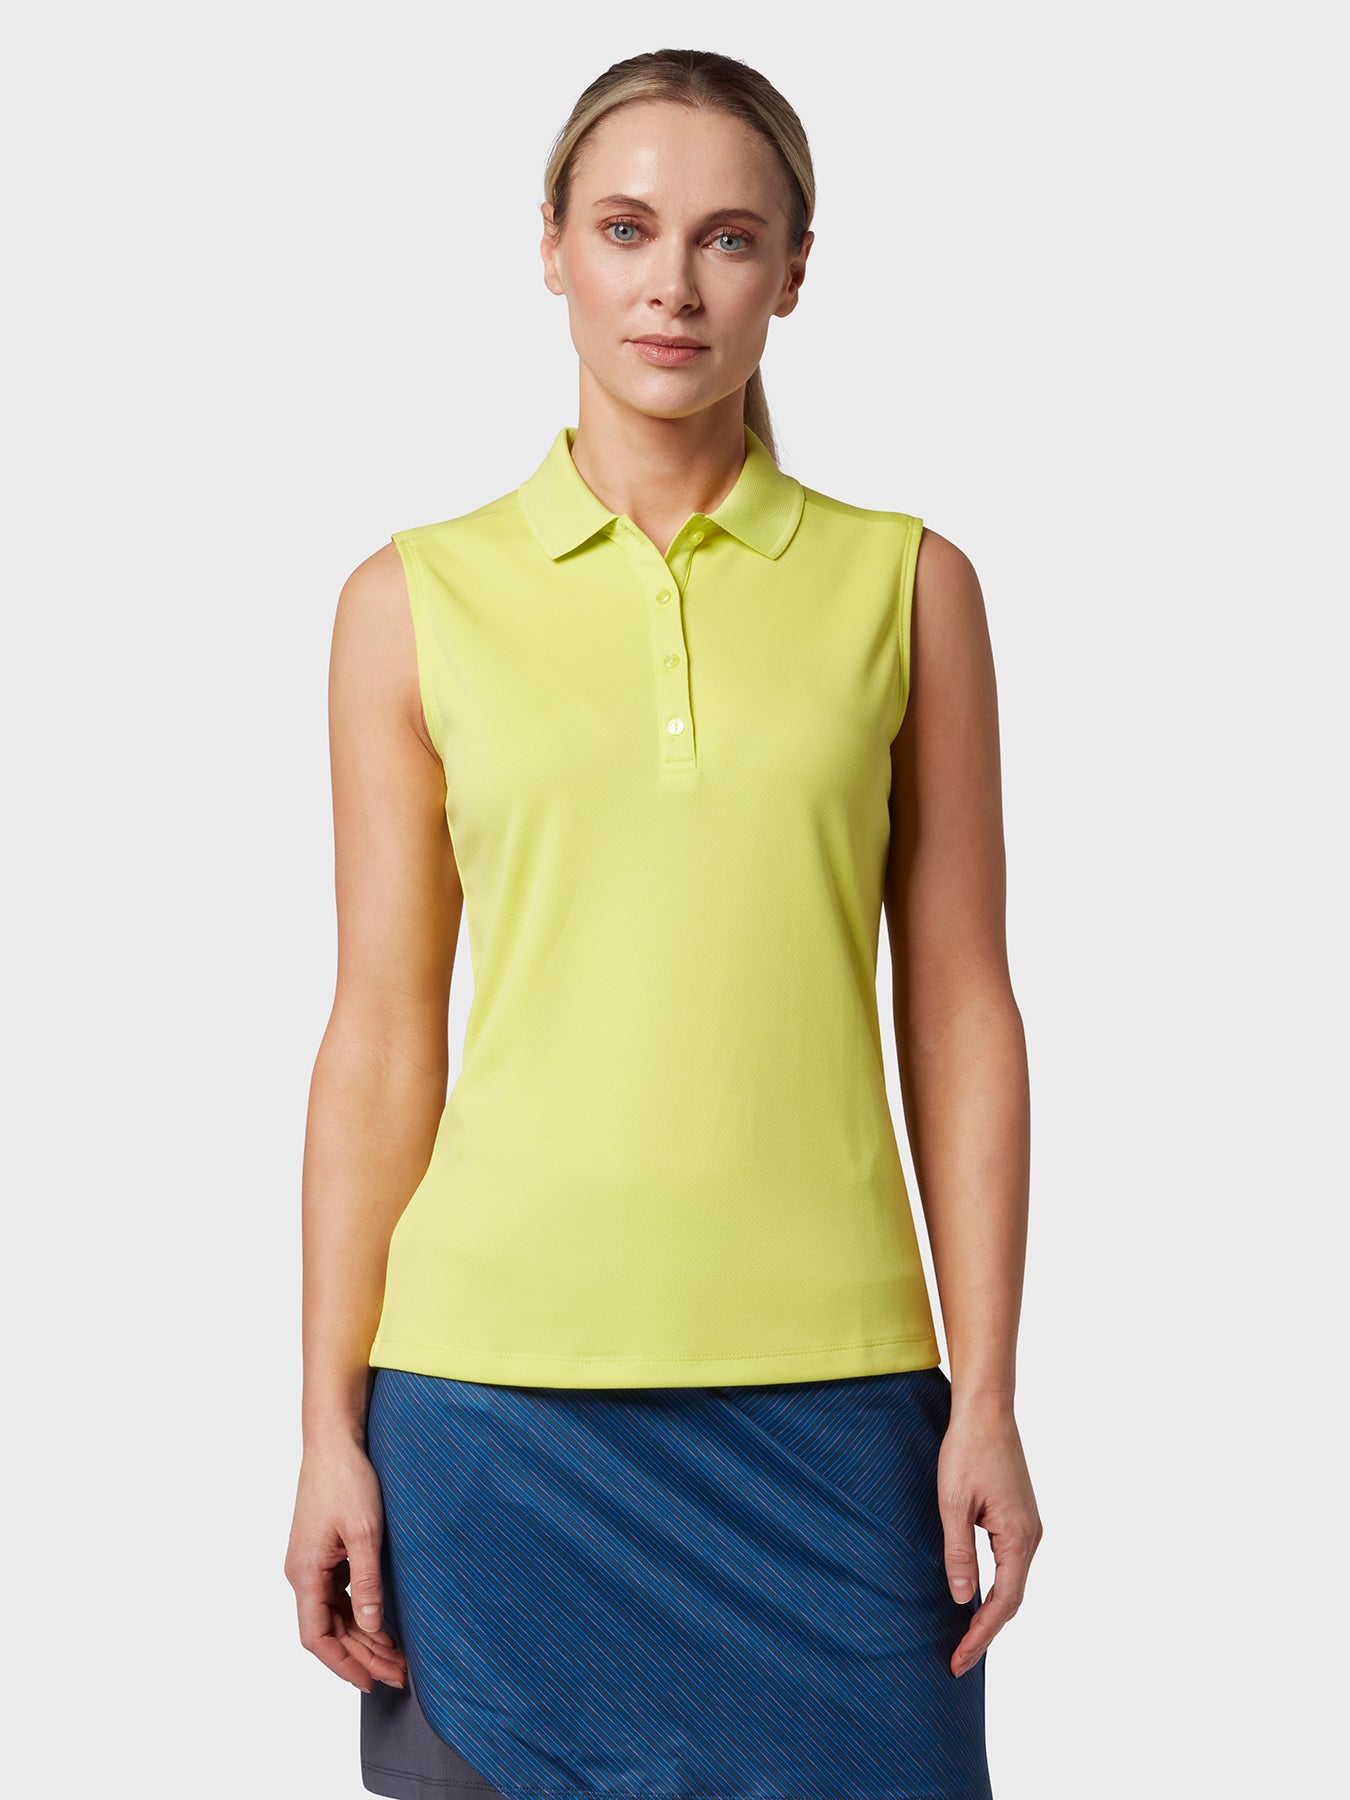 View Sleeveless Womens Polo In Limeade Limeade XXL information